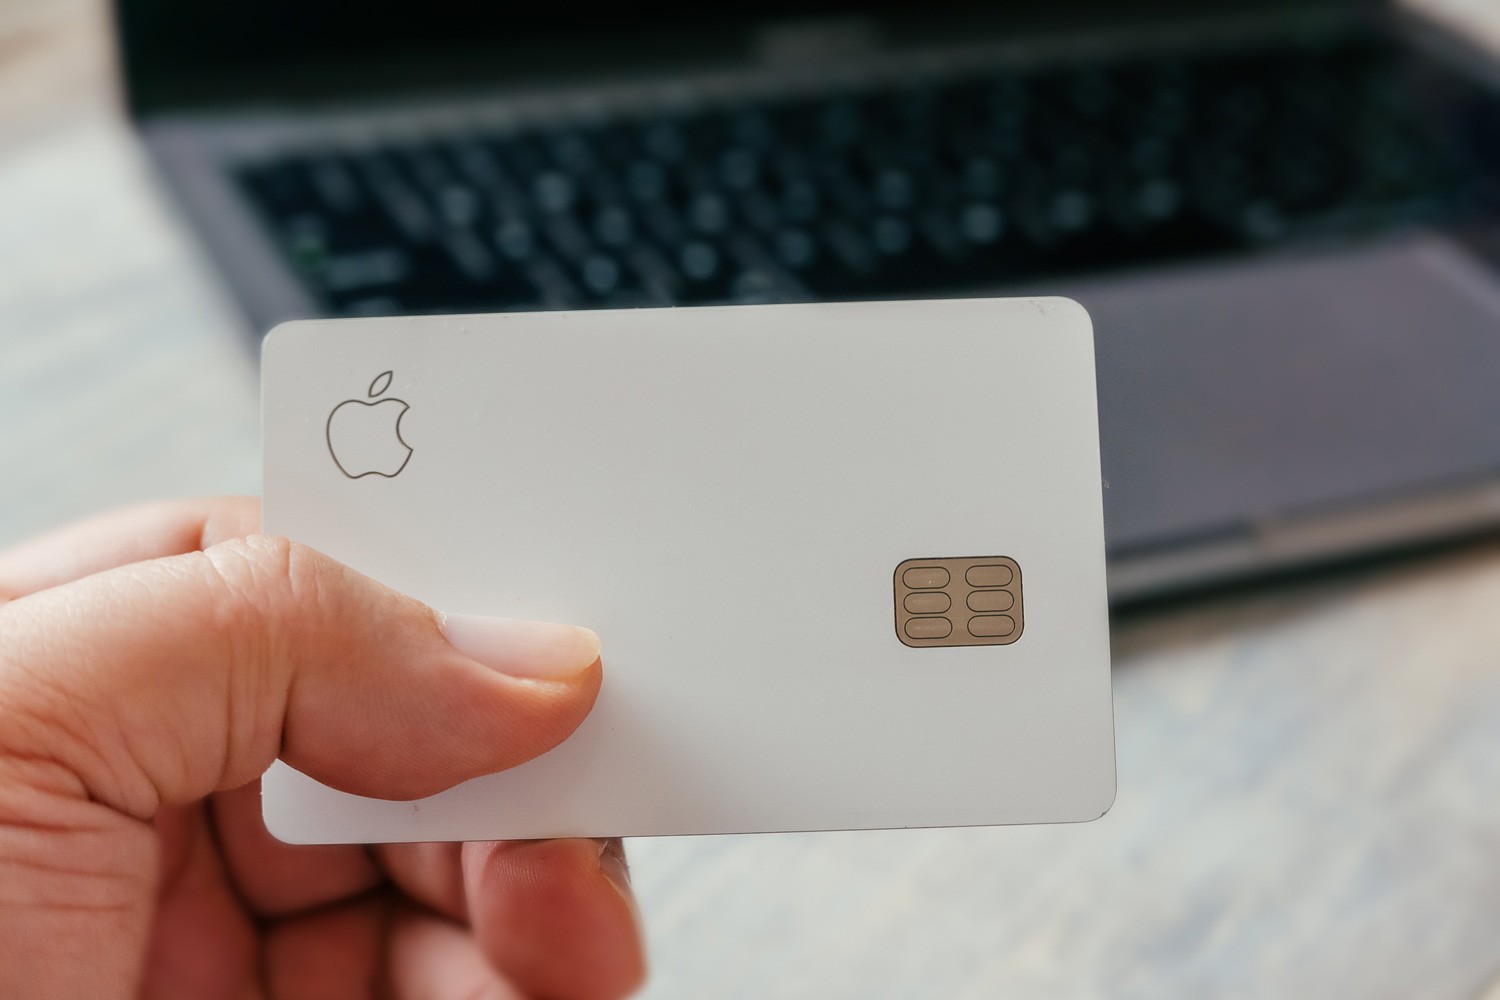 Physical Apple Credit Card Titanium with MacBook Pro ready to make an online purchase. Apple is a multinational technology company.